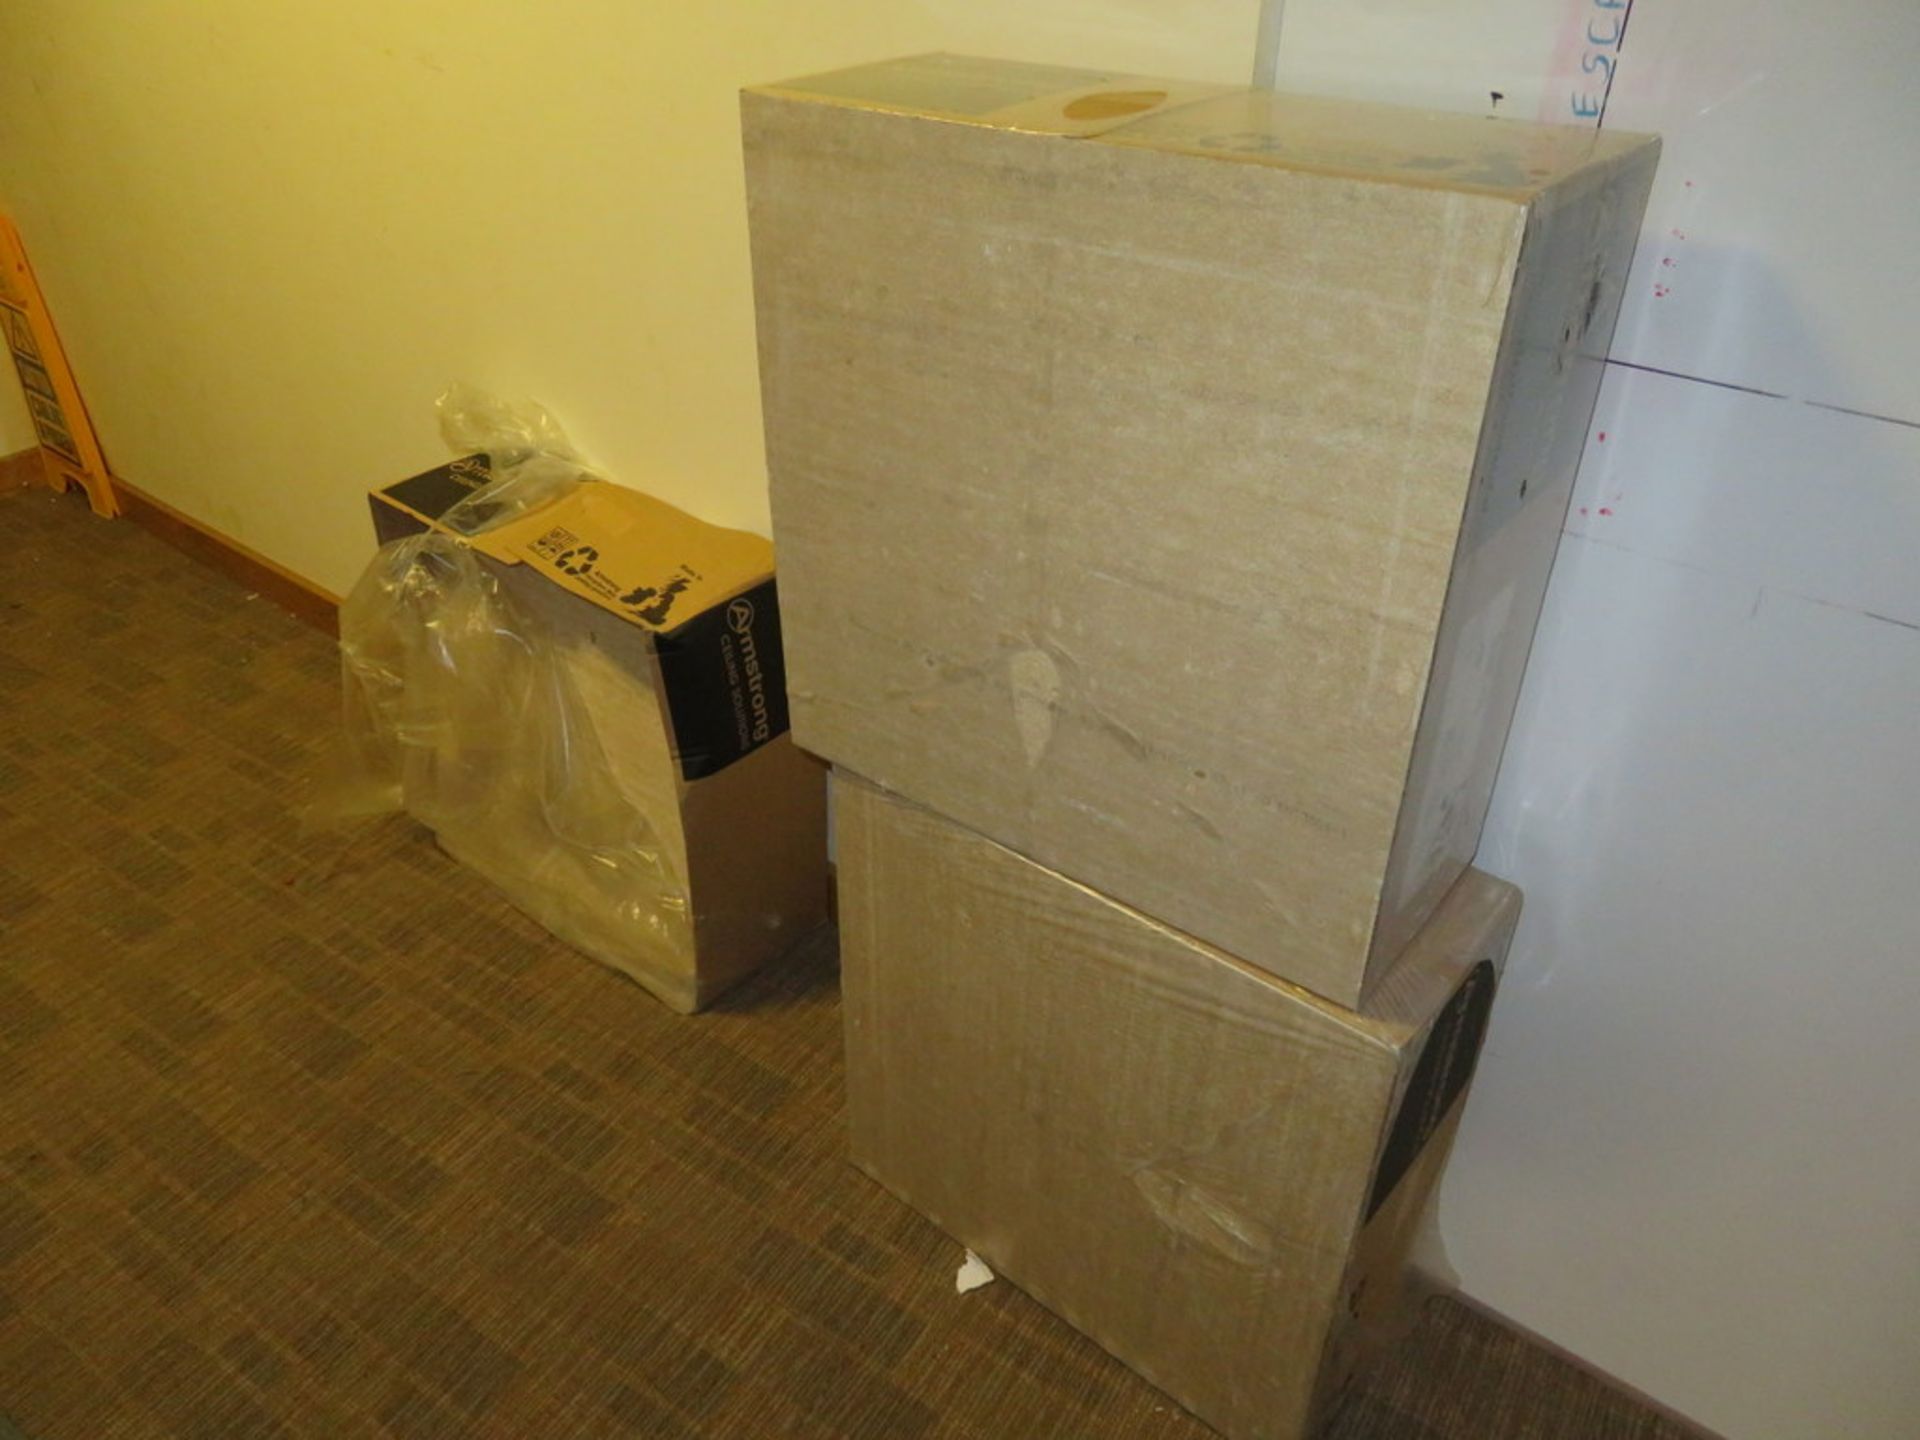 LOOSE AND REMOVABLE CONTENTS OF THE SECOND FLOOR STOREROOM - Image 2 of 4